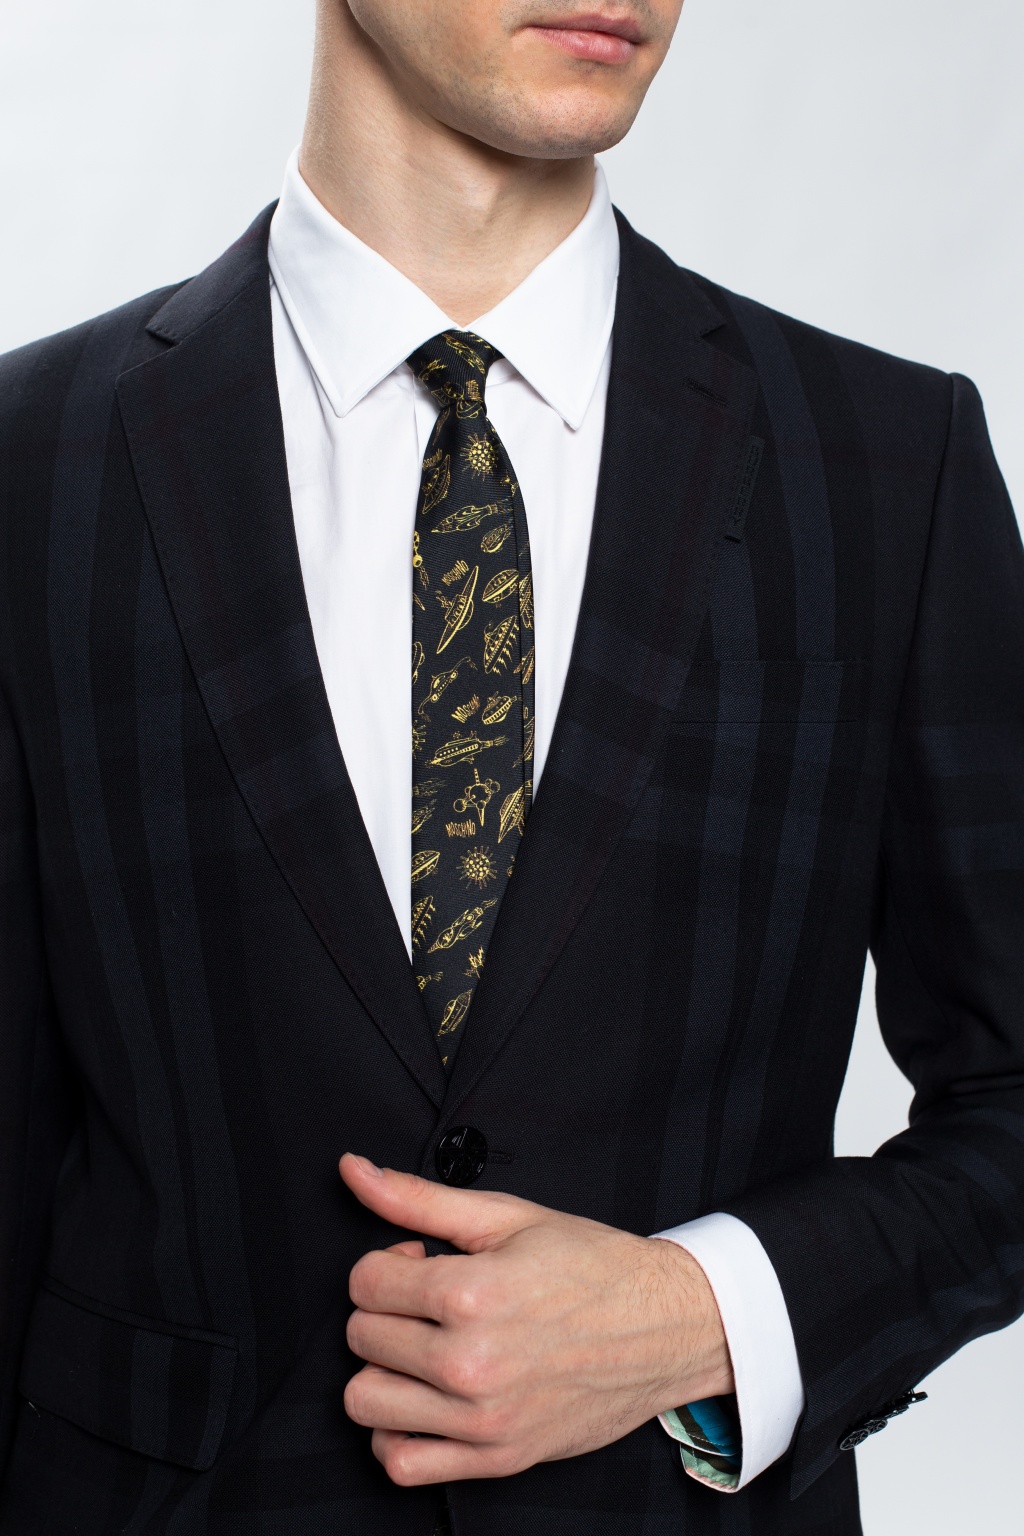 Moschino Patterned tie